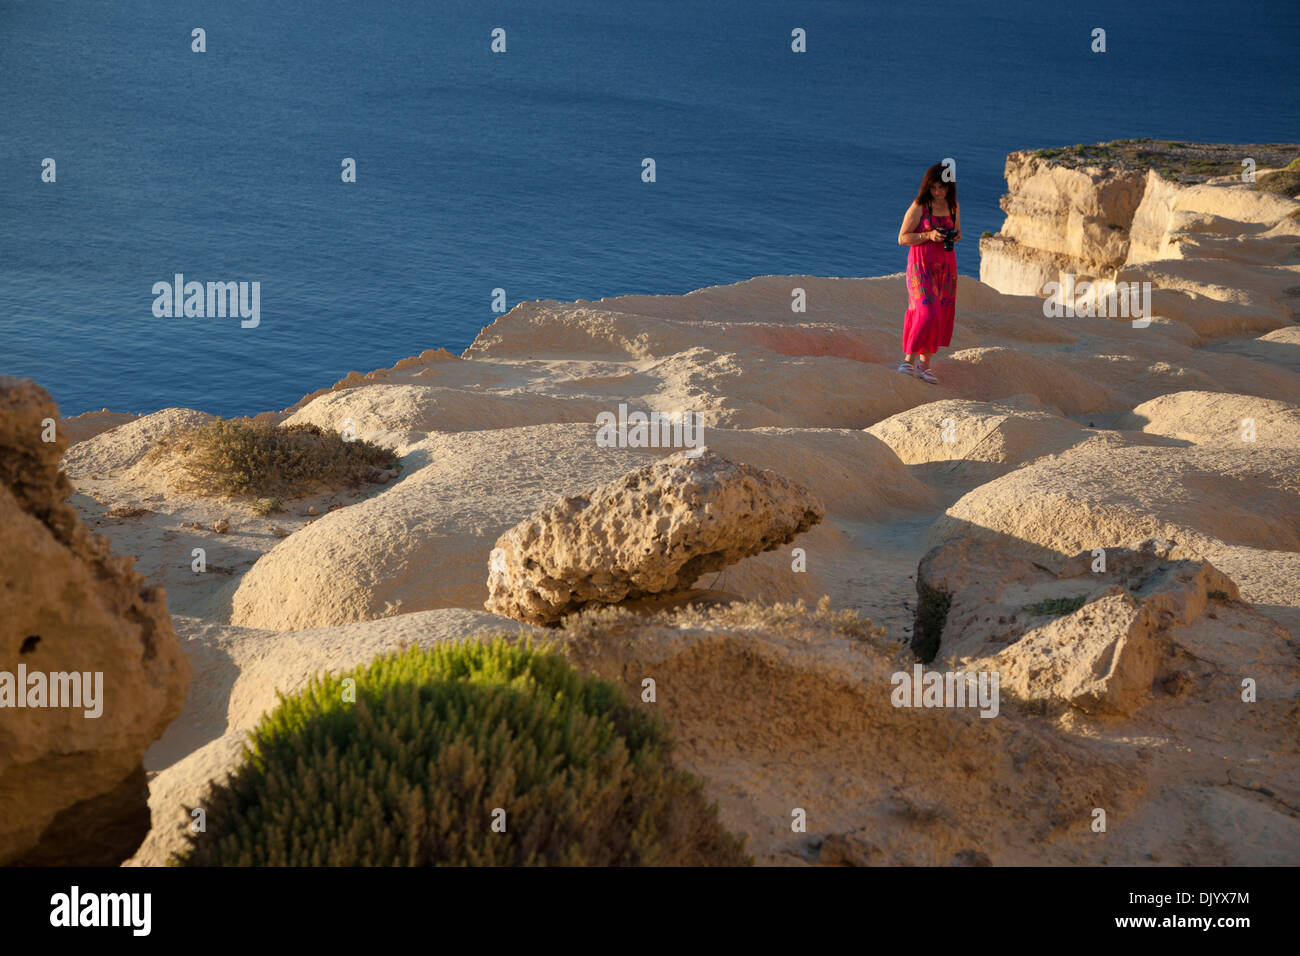 A woman strolling on a plateau eroded into waves by wind erosion in western Gozo seacliffs. Stock Photo